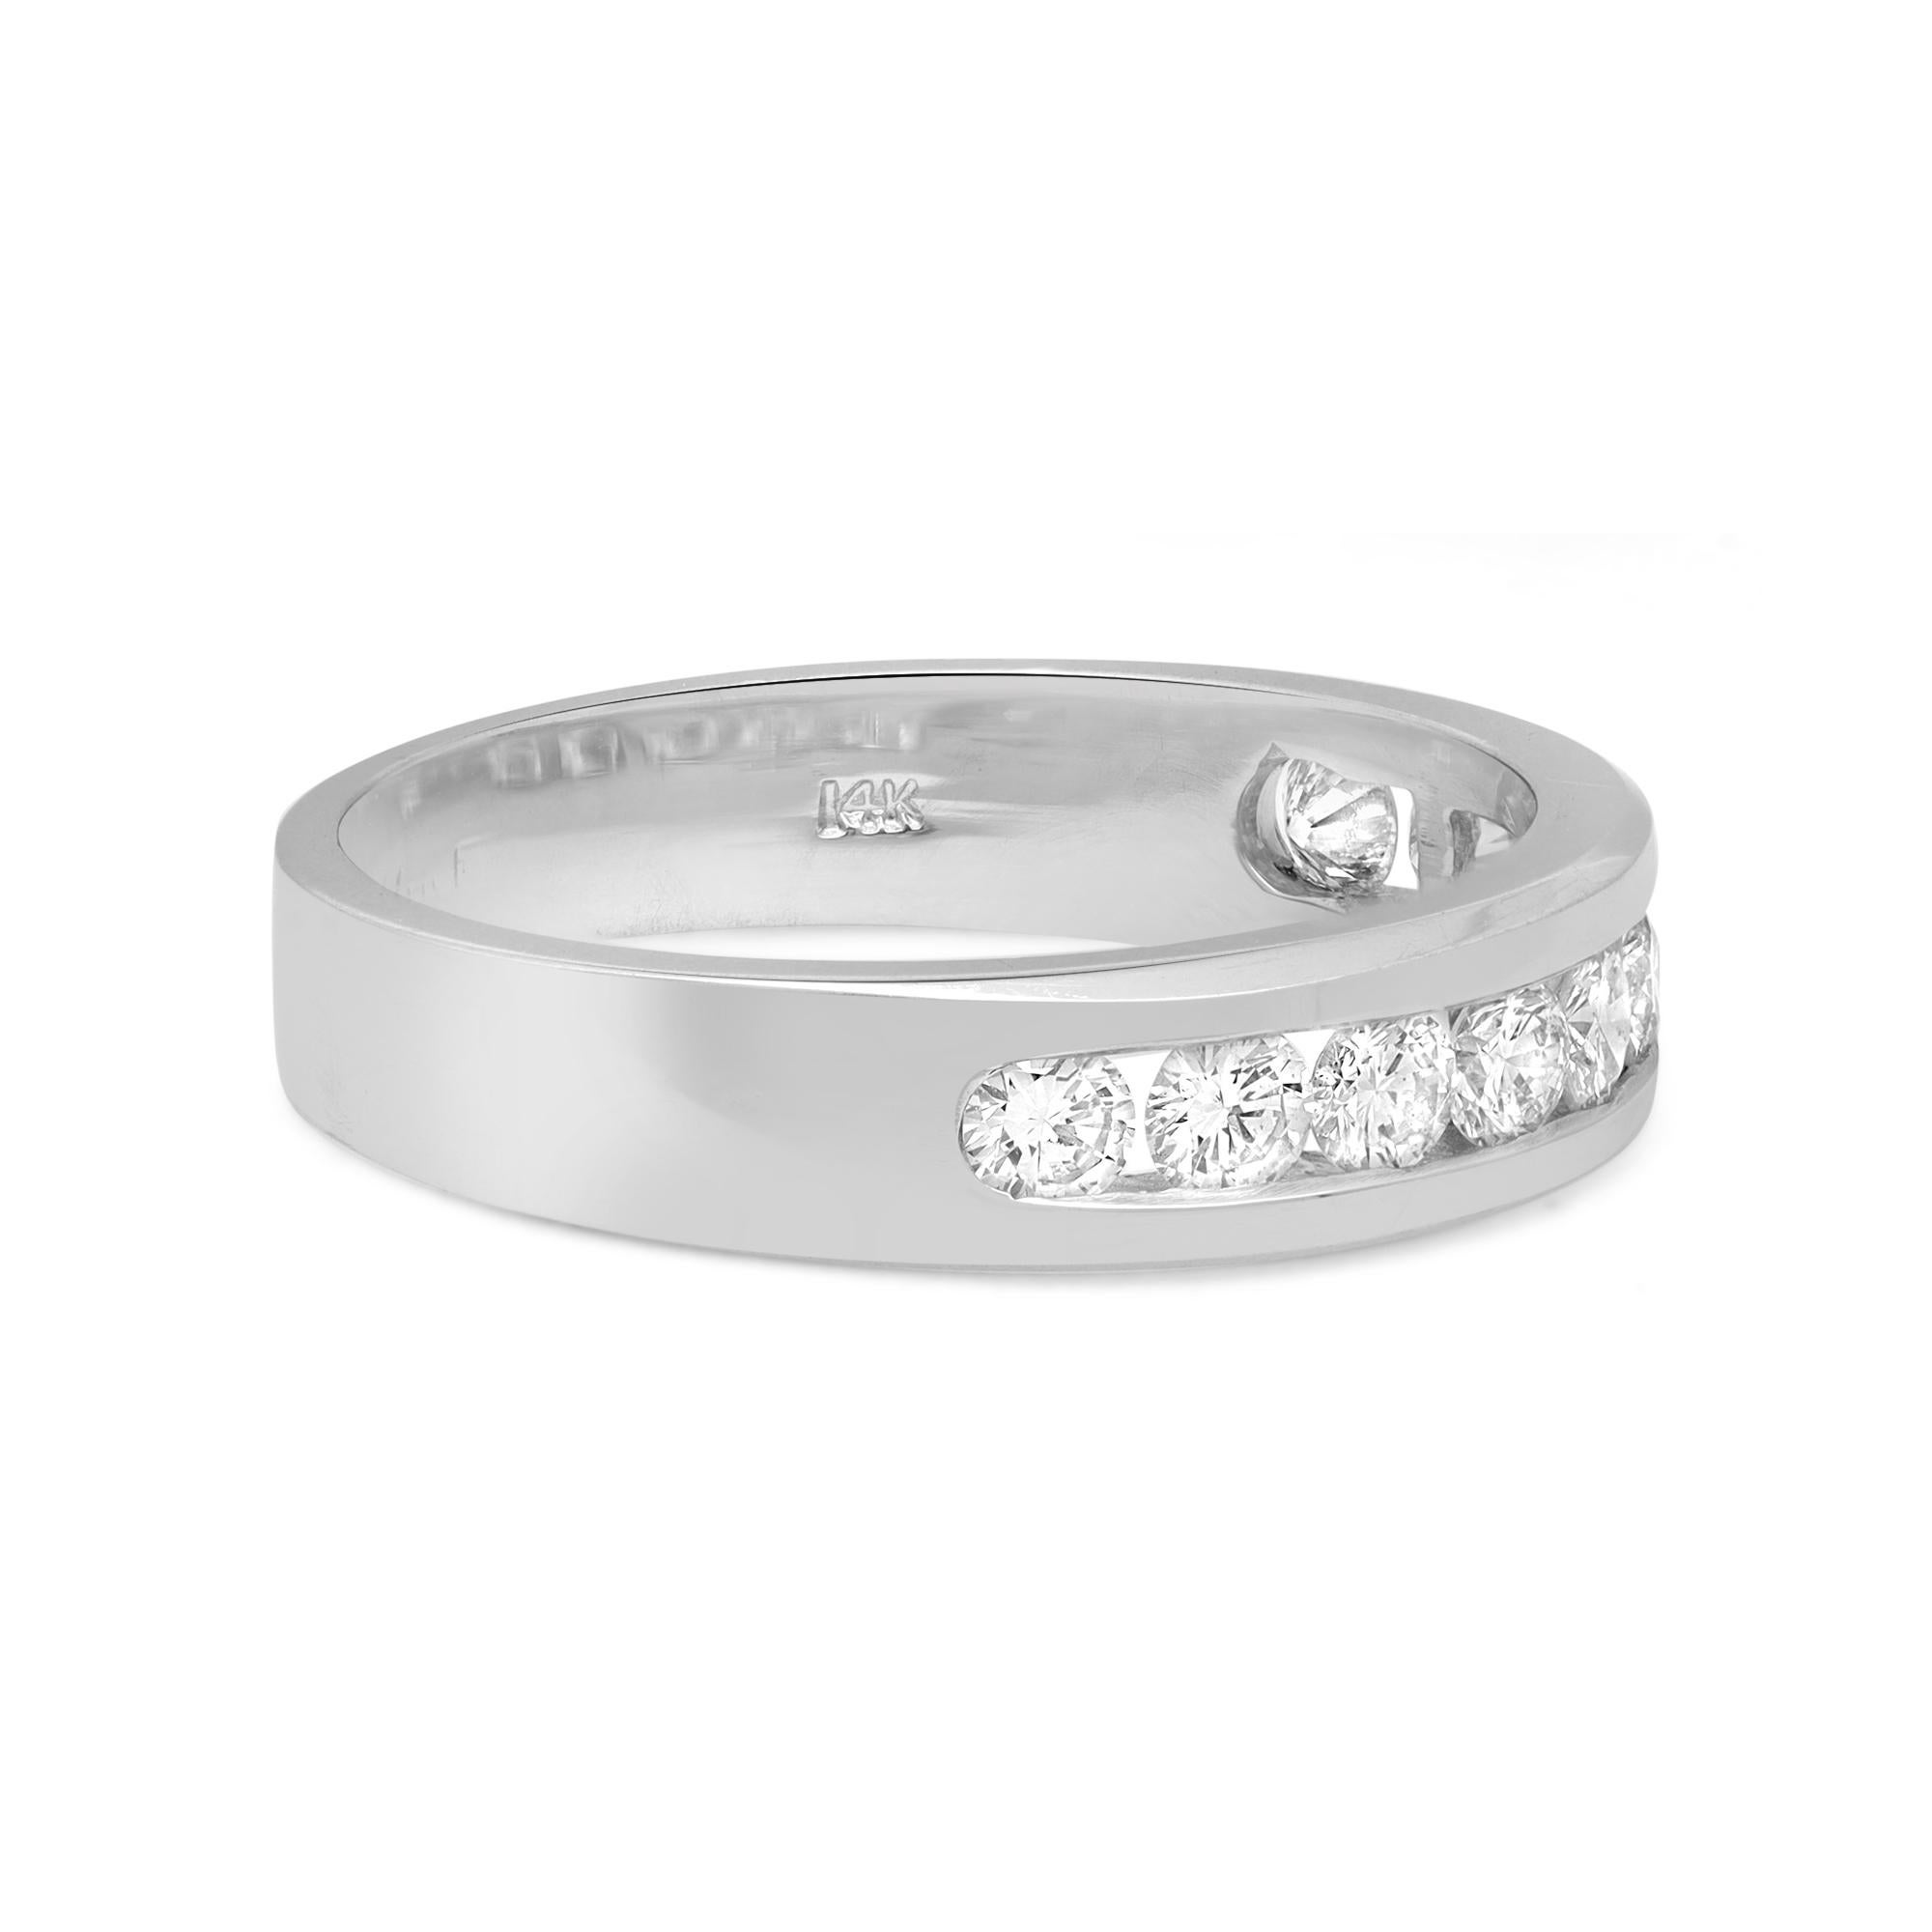 Rachel Koen 0.75 Cttw Round Cut Diamond Wedding Band Ring 14K White Gold In Excellent Condition For Sale In New York, NY